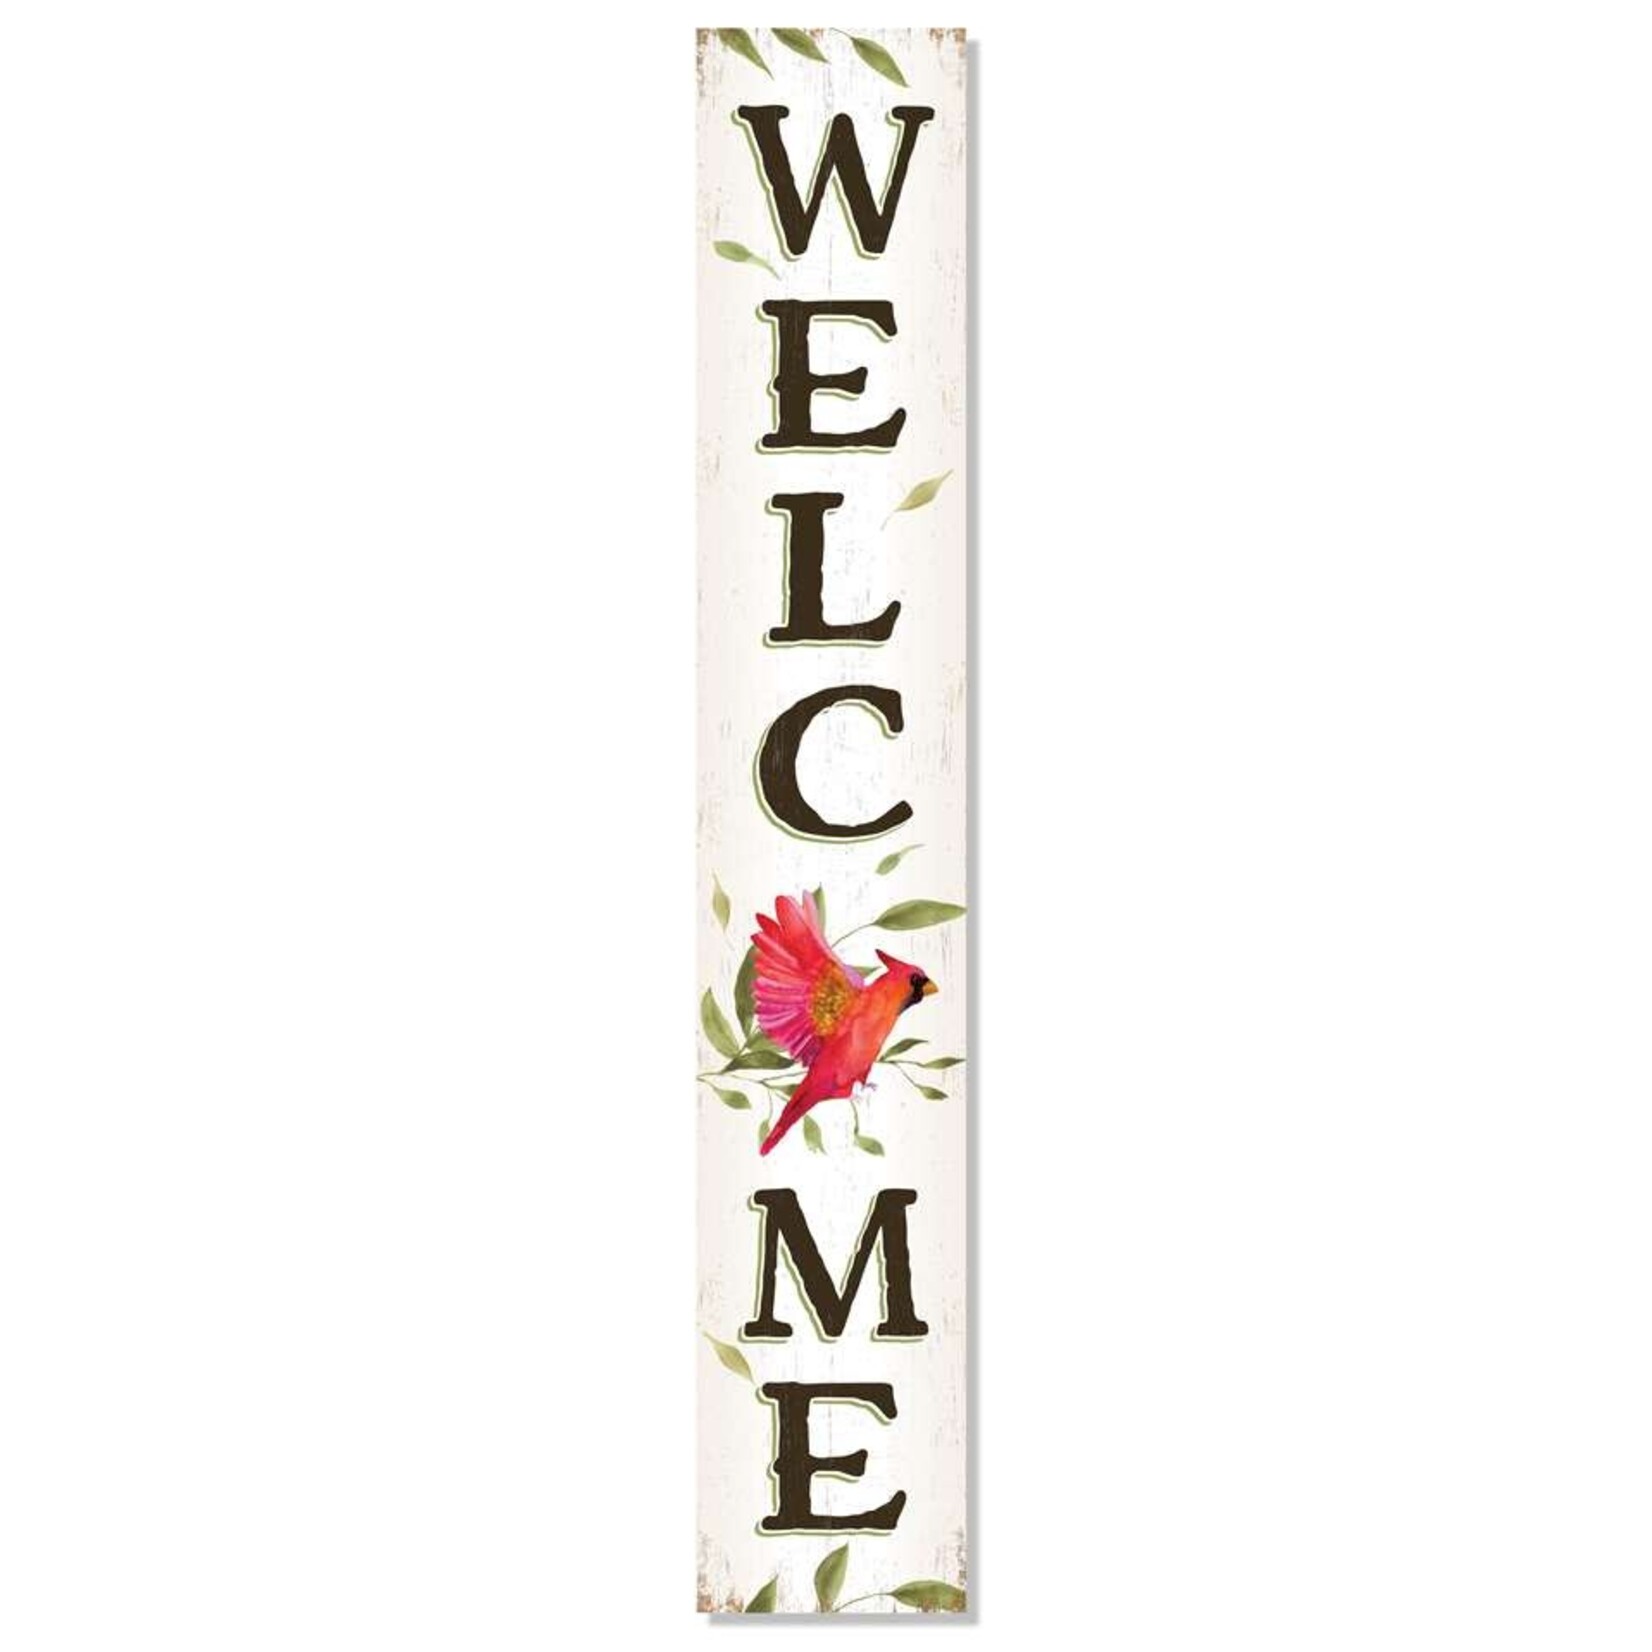 WELCOME - FLYING CARDINAL - PORCH BOARD